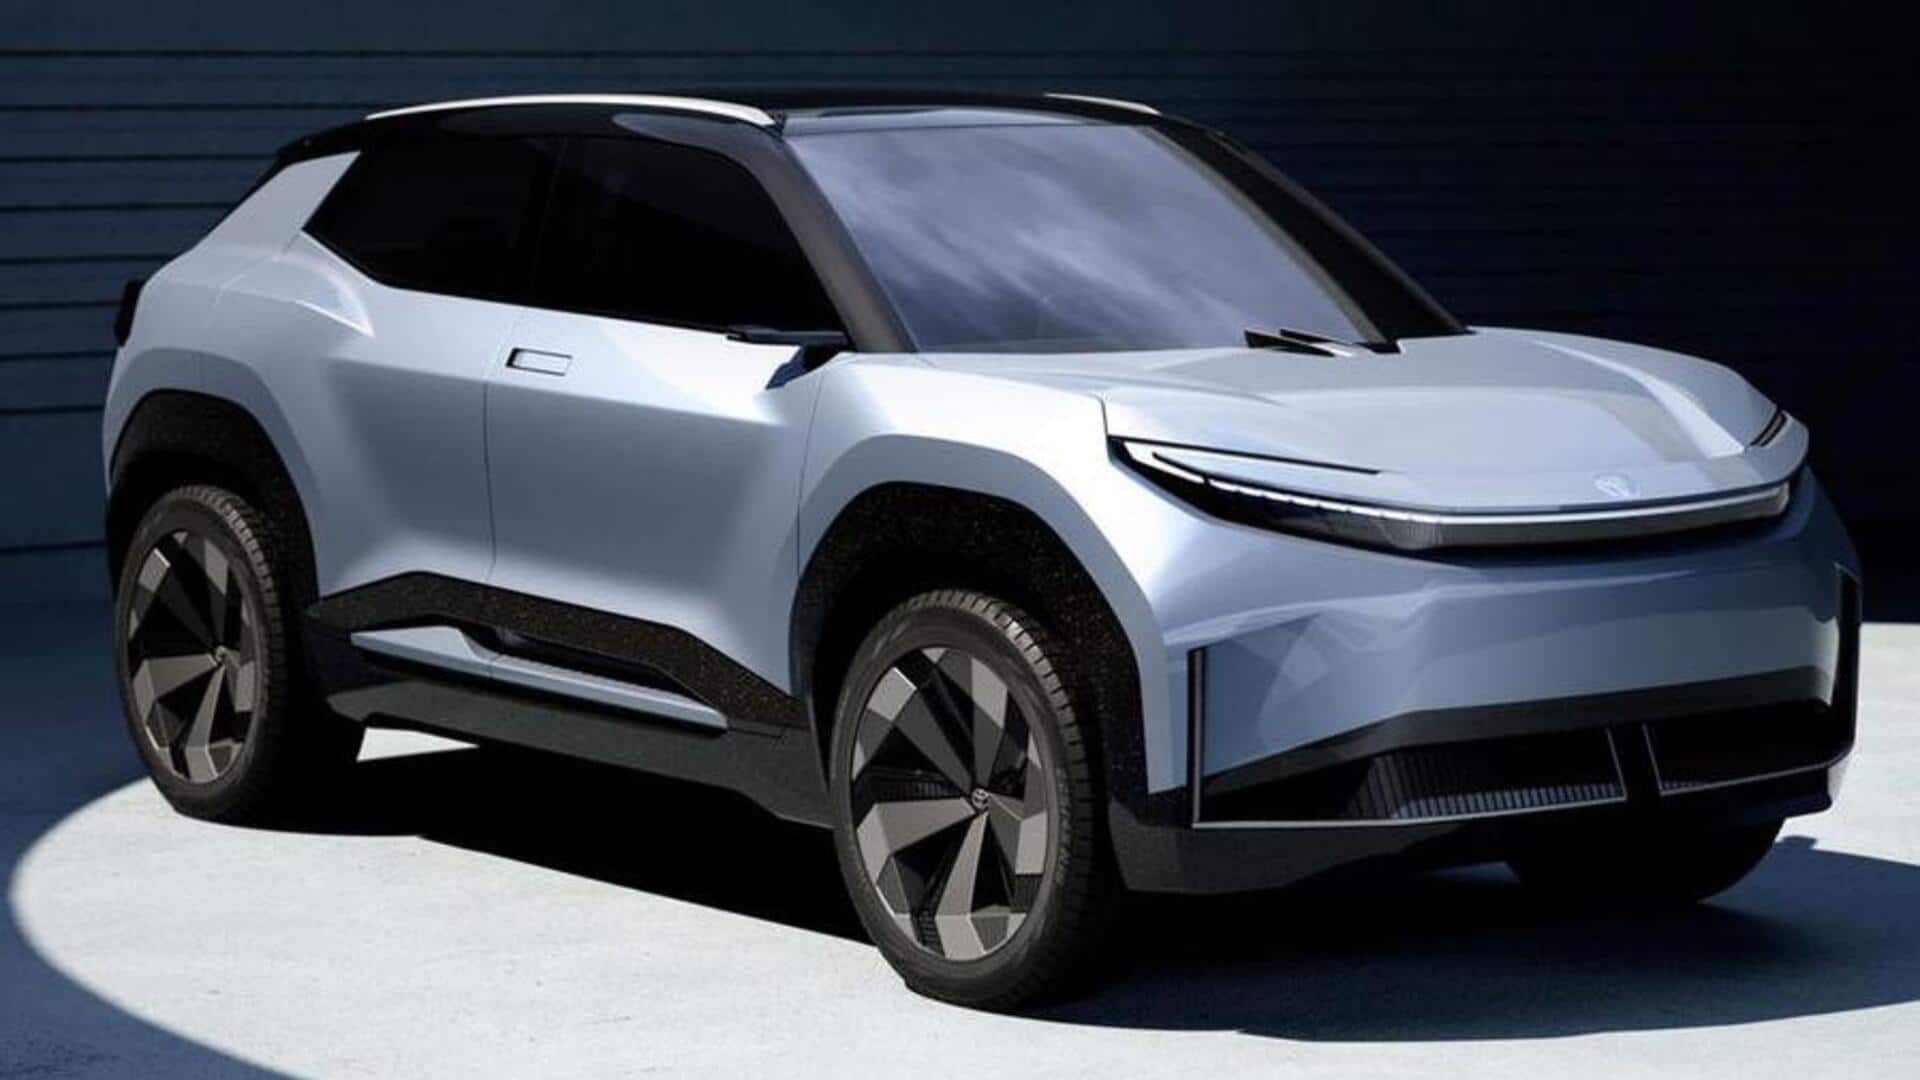 Toyota unveils Urban SUV concept aimed at European buyers